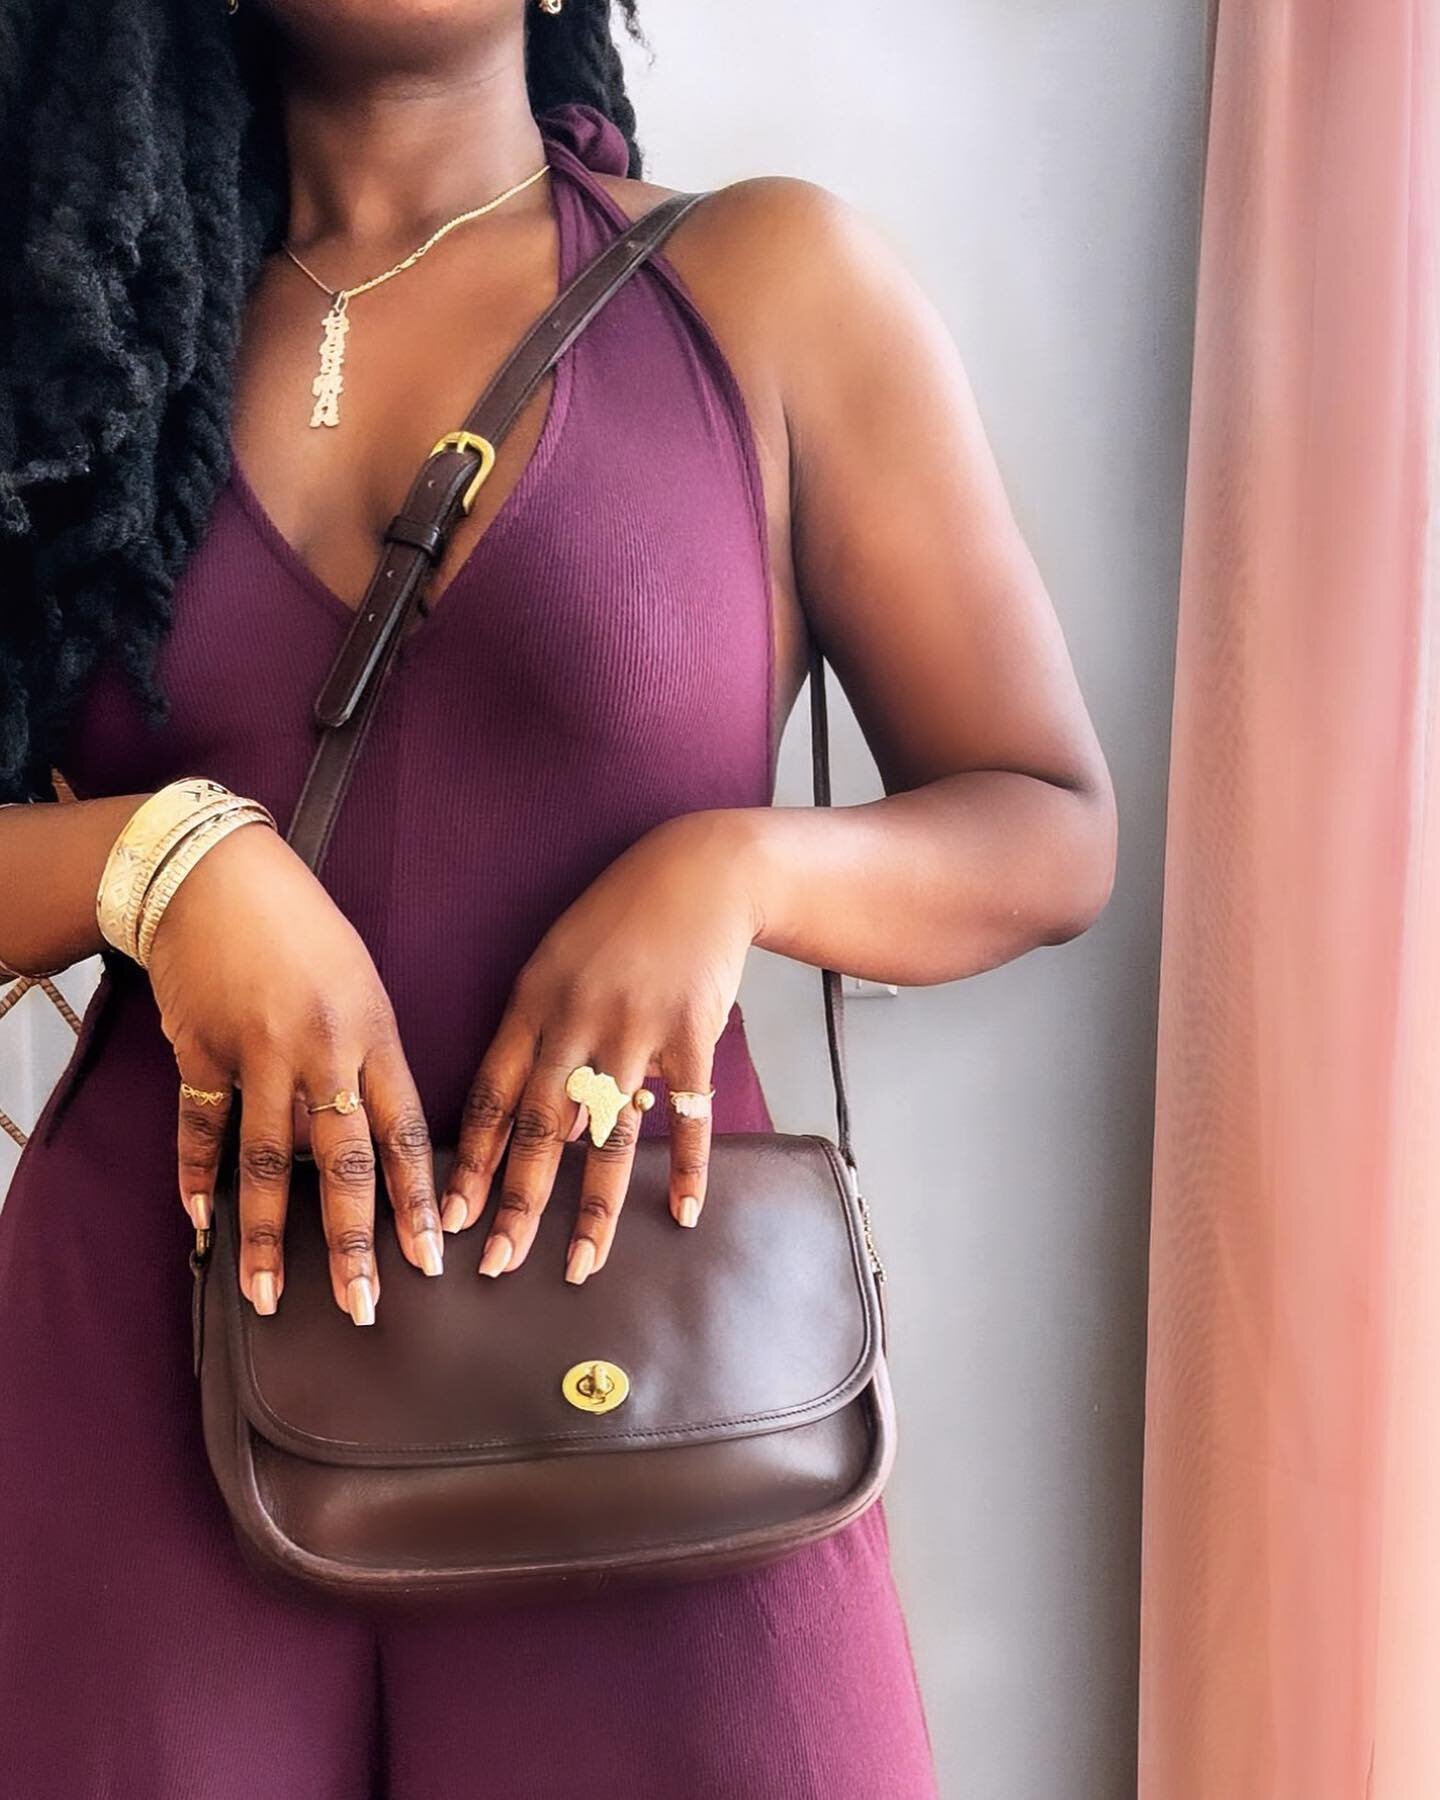 Confession: I&rsquo;m Deep into Rehab 

Remember hobbies? Those things we enjoyed purely for fun before life got hectic?

Recently, I discovered a love of rehabbing vintage luxury bags. A great sustainable way to add to my personal collection + Get b